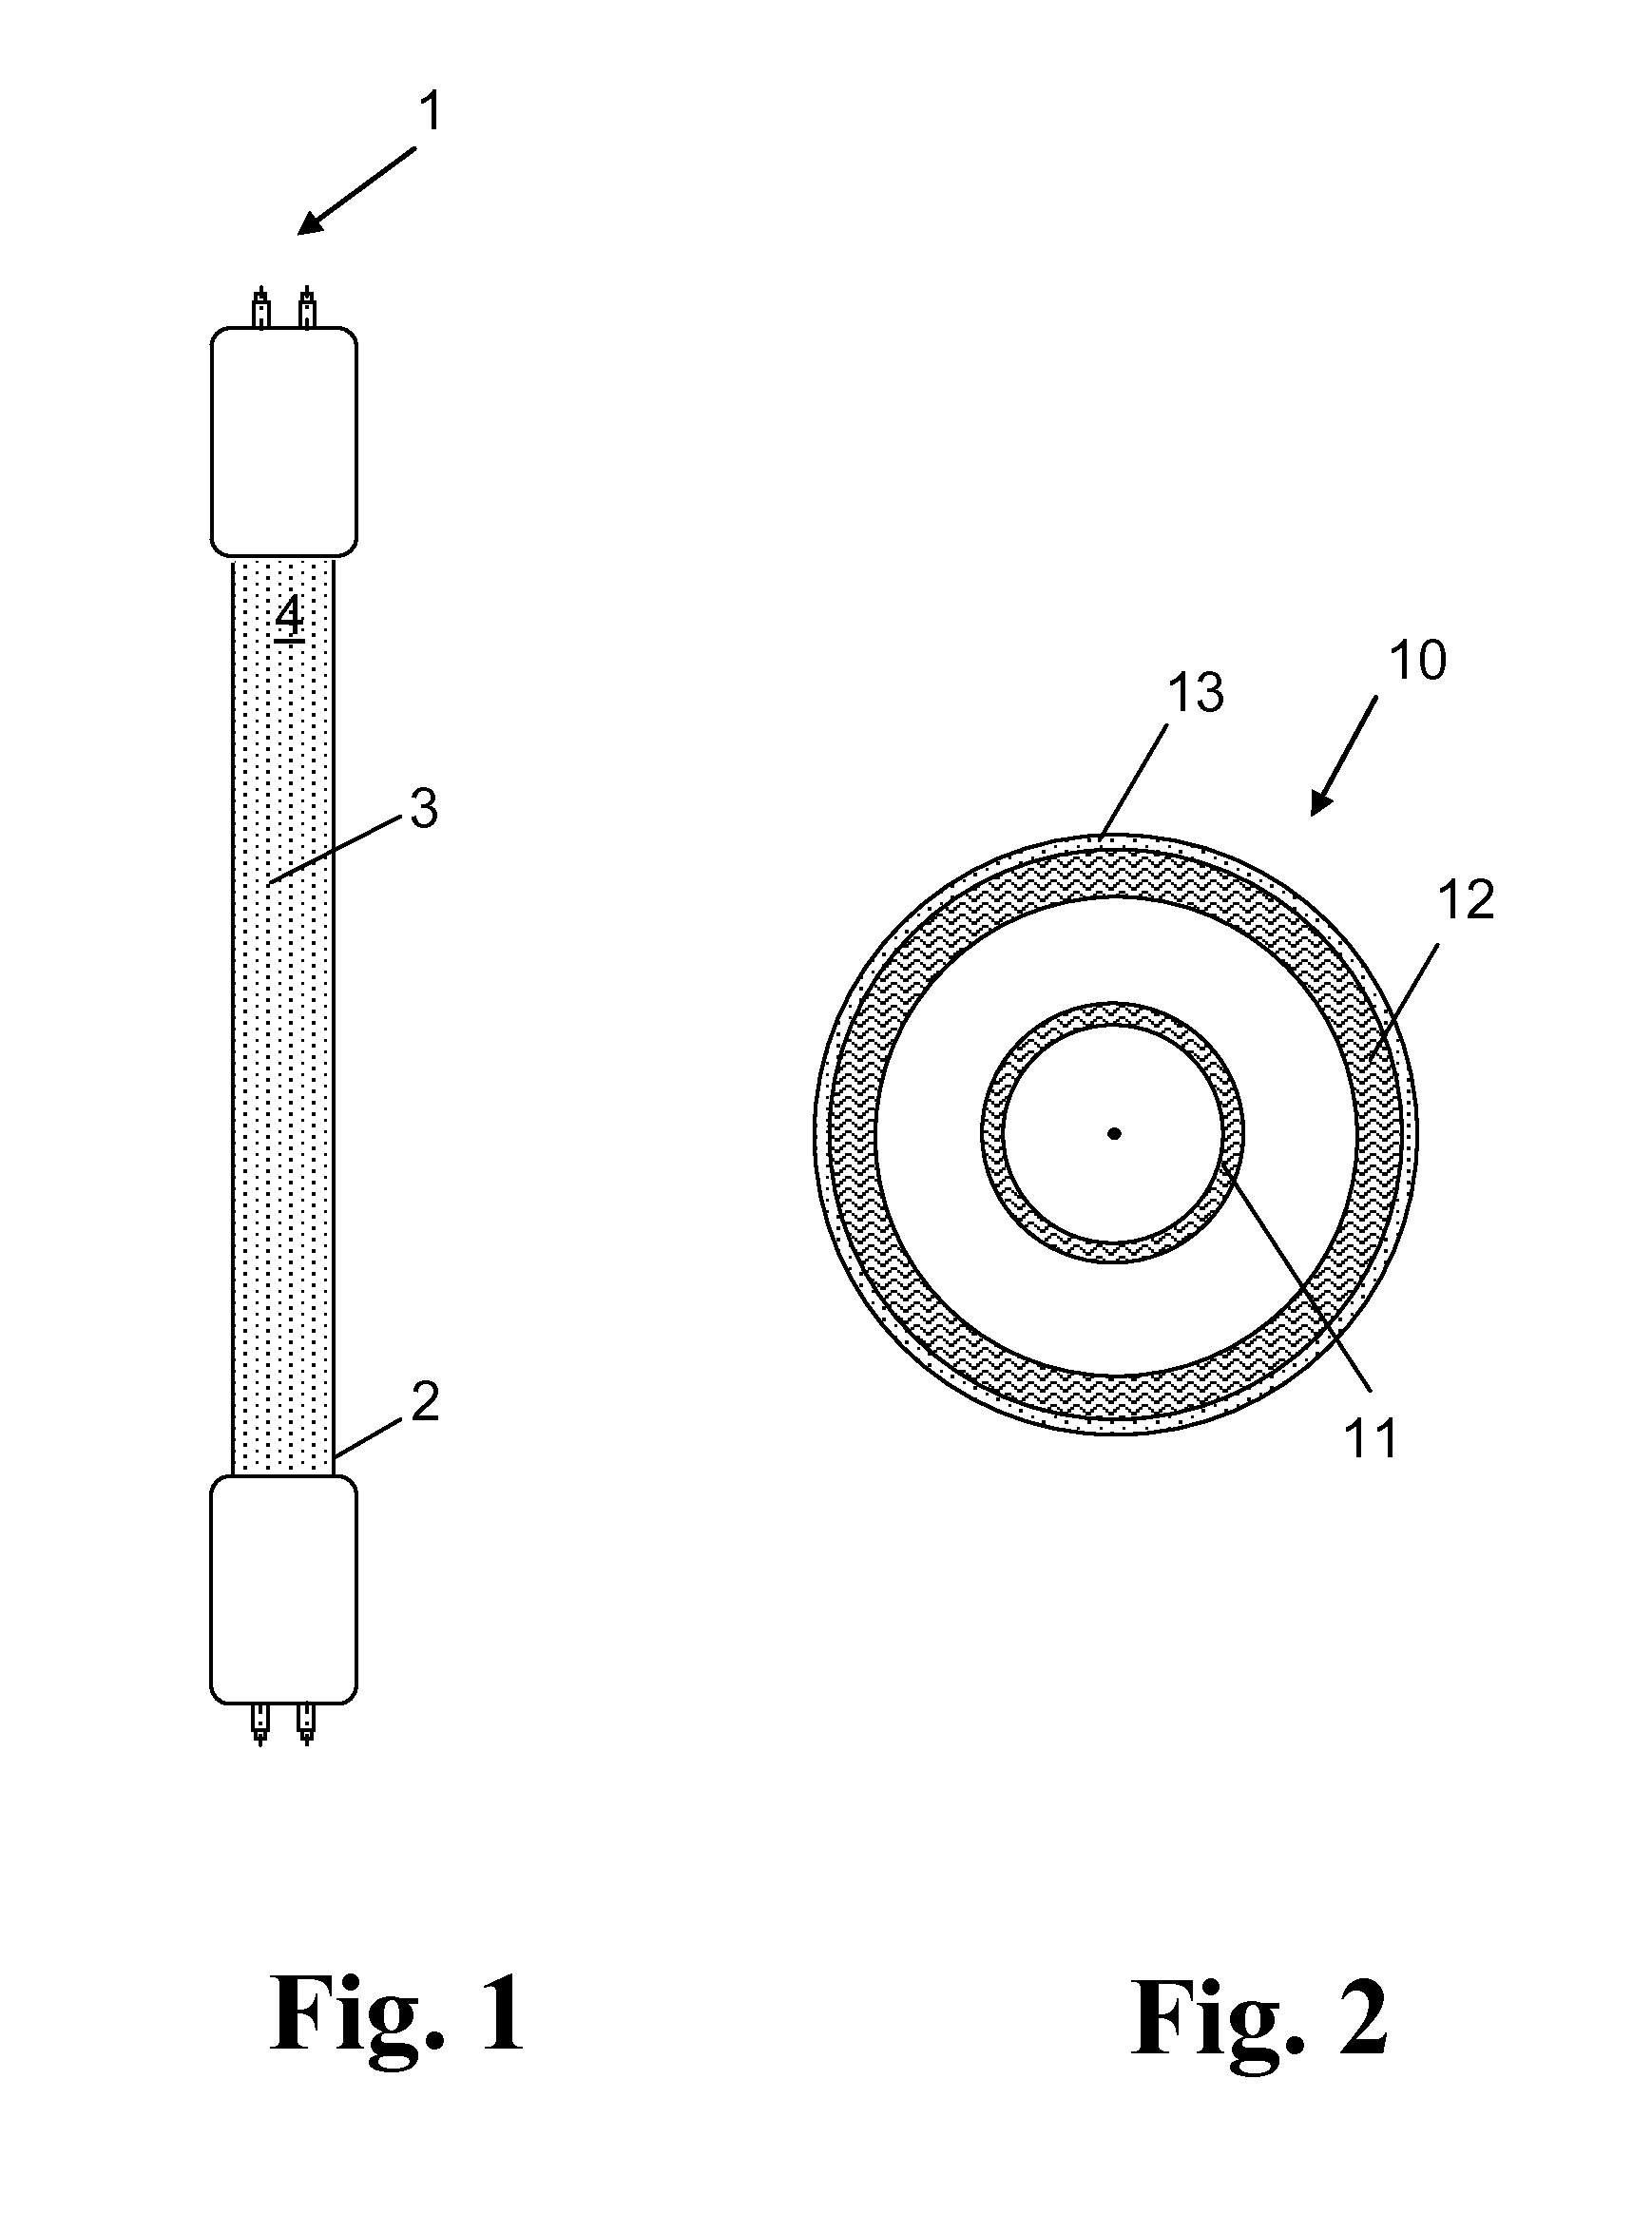 Radiator unit for generating ultraviolet radiation and method for its production